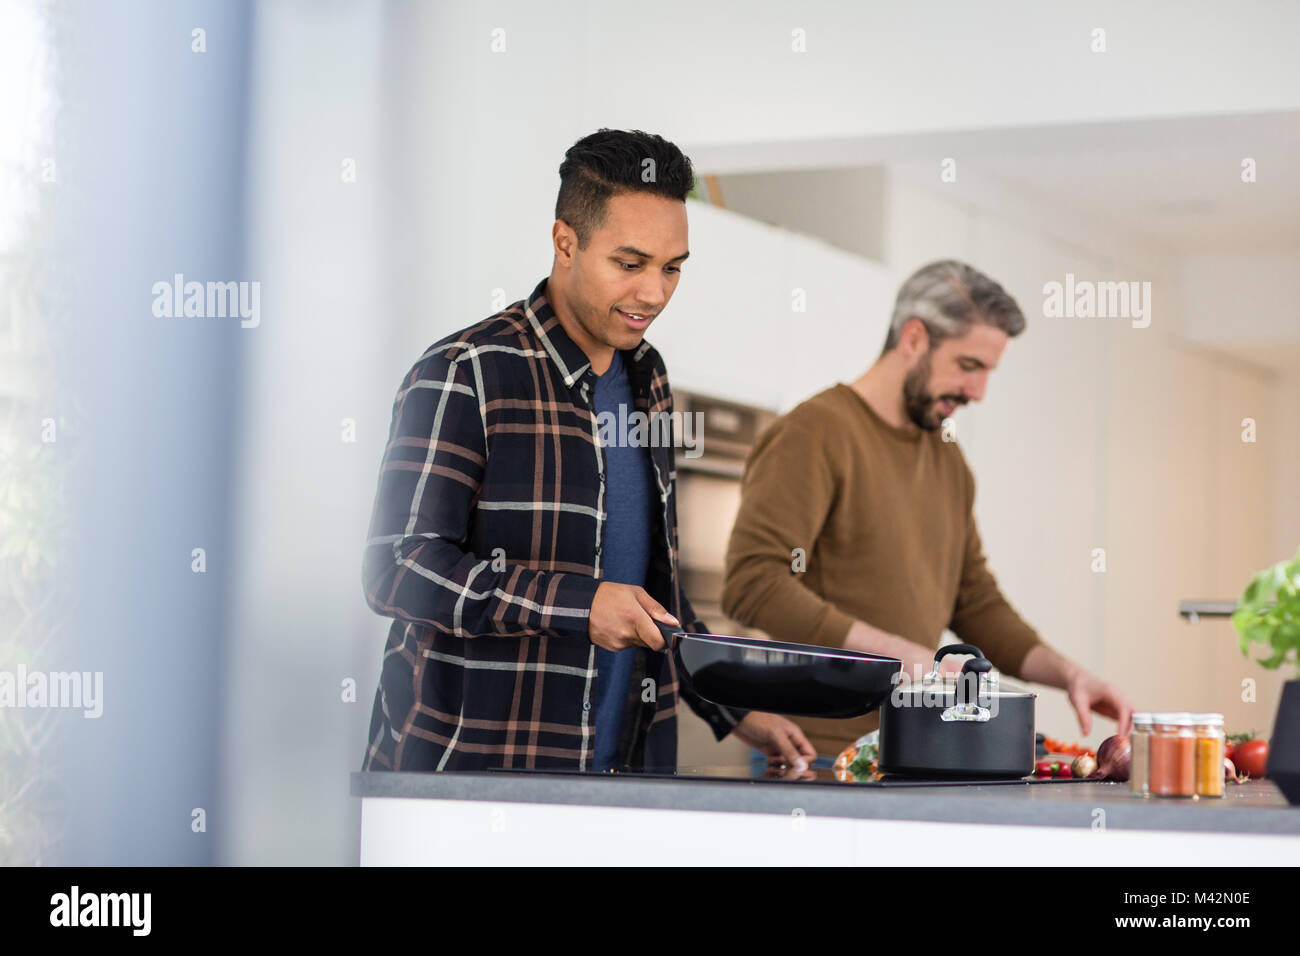 Adult male friends preparing a meal together Stock Photo